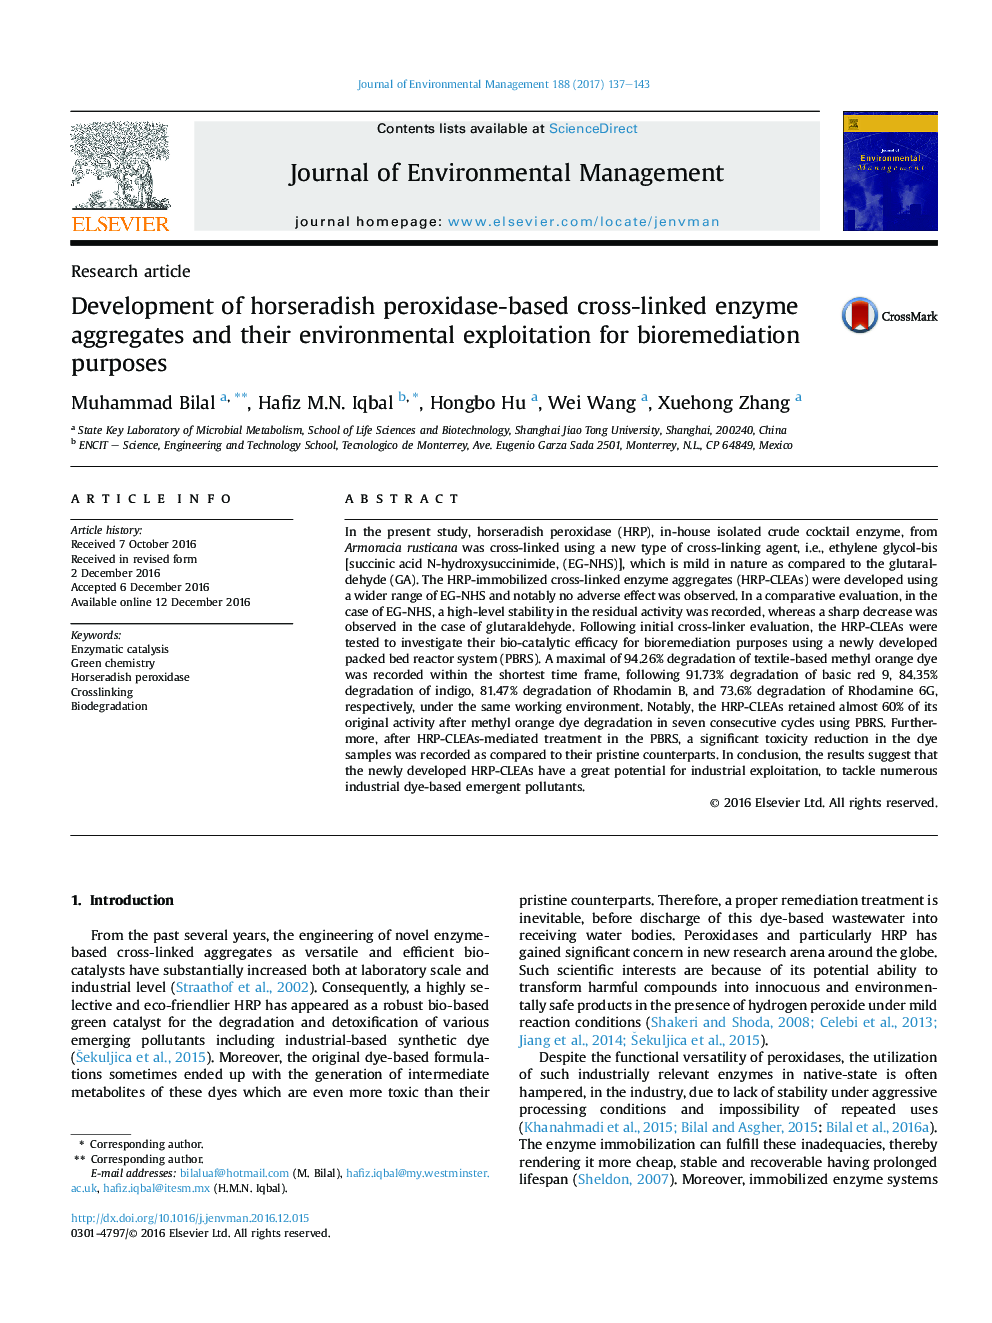 Development of horseradish peroxidase-based cross-linked enzyme aggregates and their environmental exploitation for bioremediation purposes